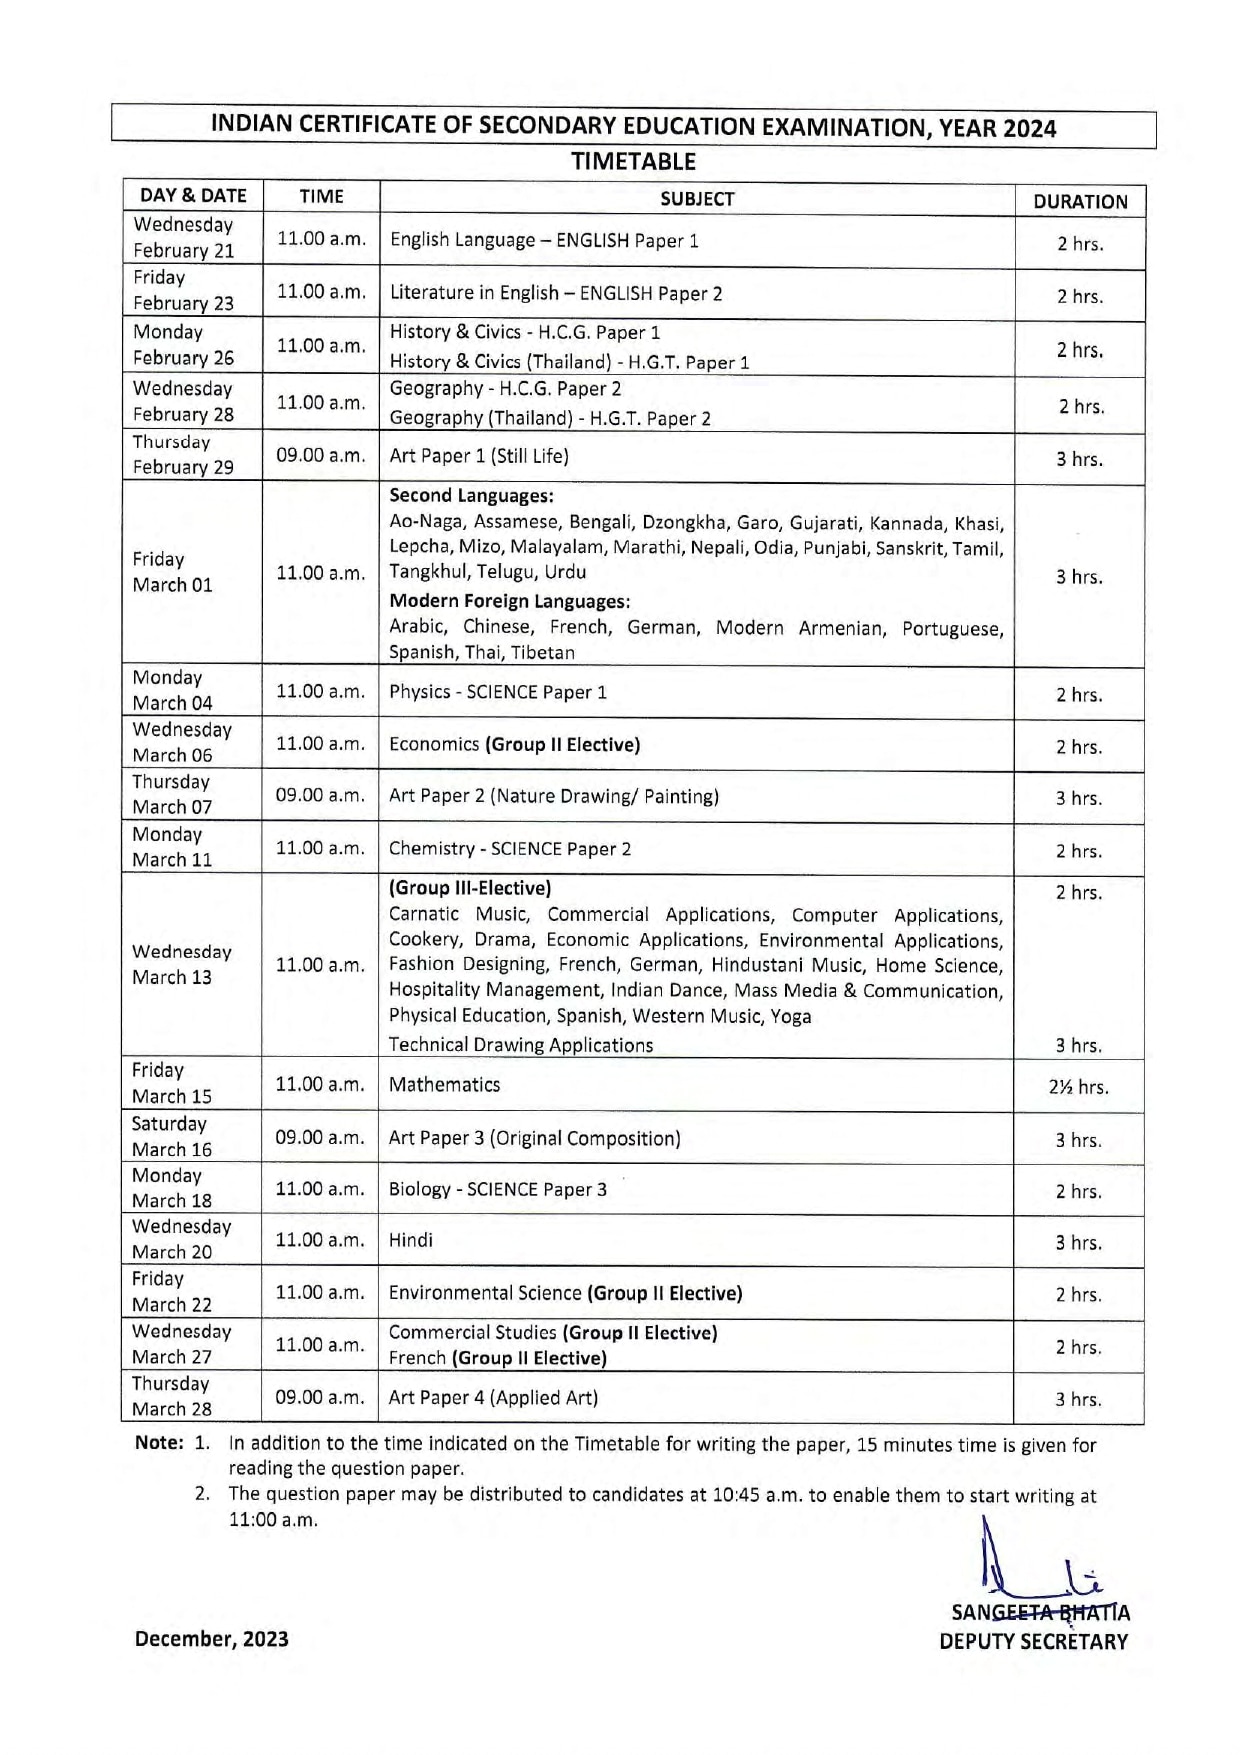 CISCE Date Sheet 2024 ICSE 10th, ISC 12th Exam Timetable OUT At Cisce